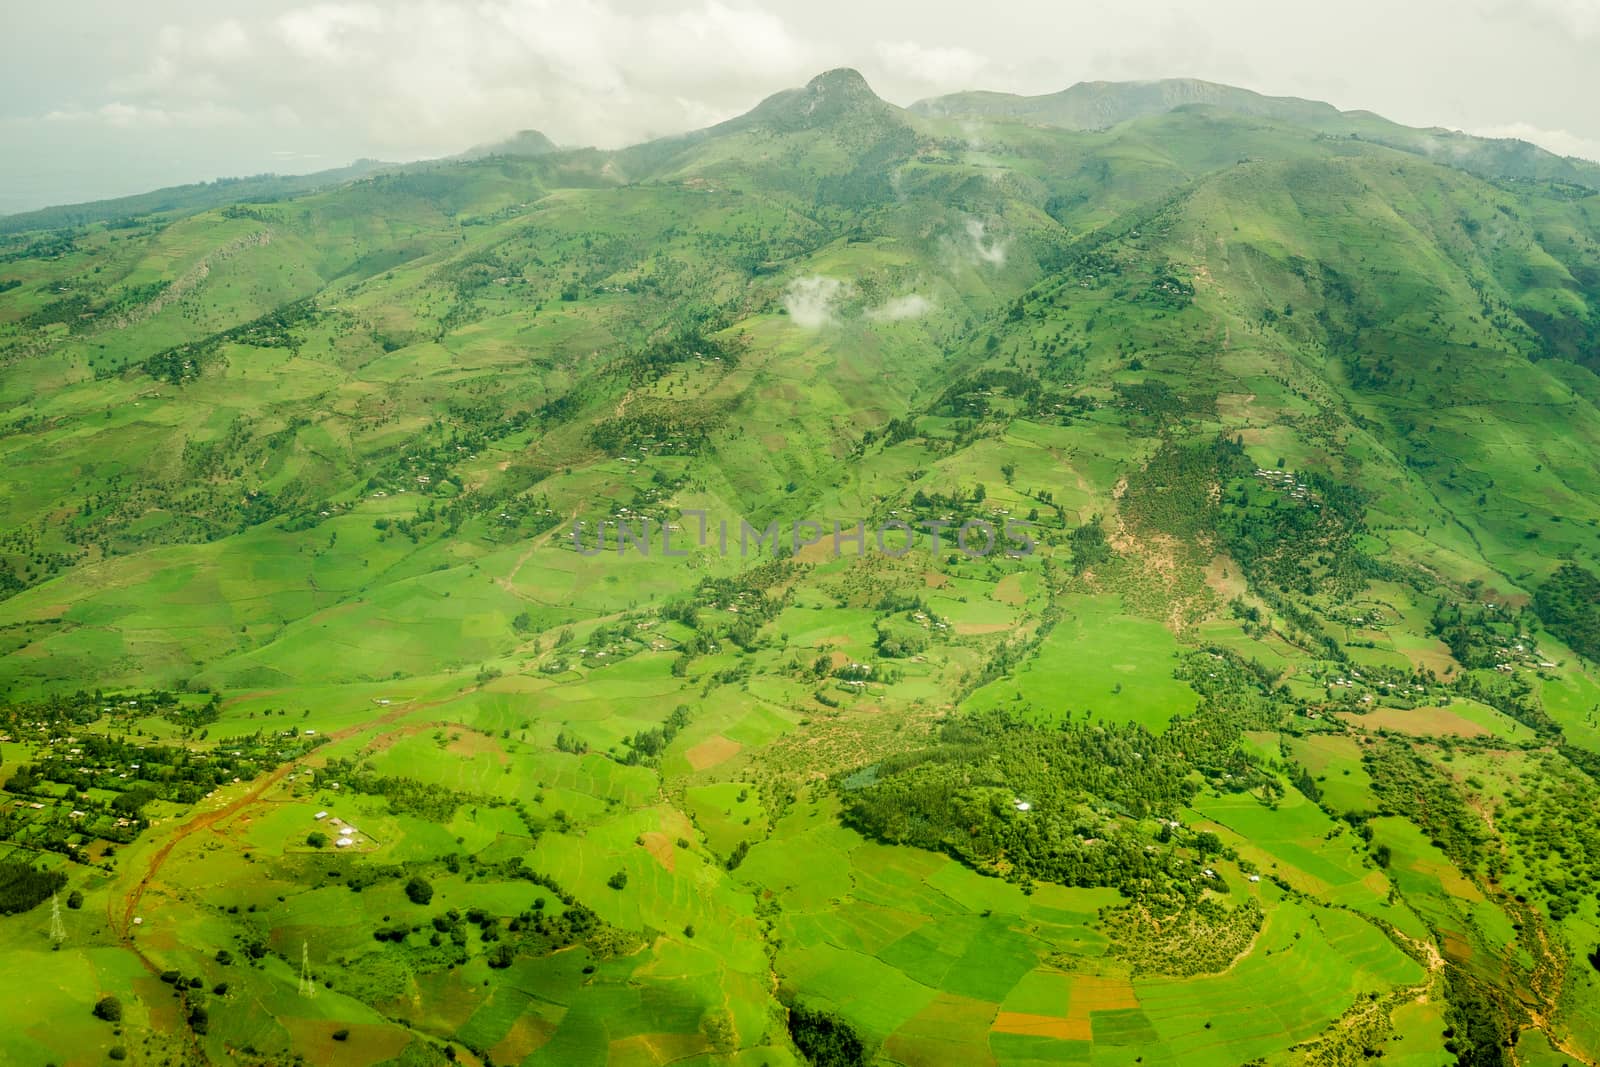 Highlands surrounding Addis Ababa covered with lush green grass and vegetation